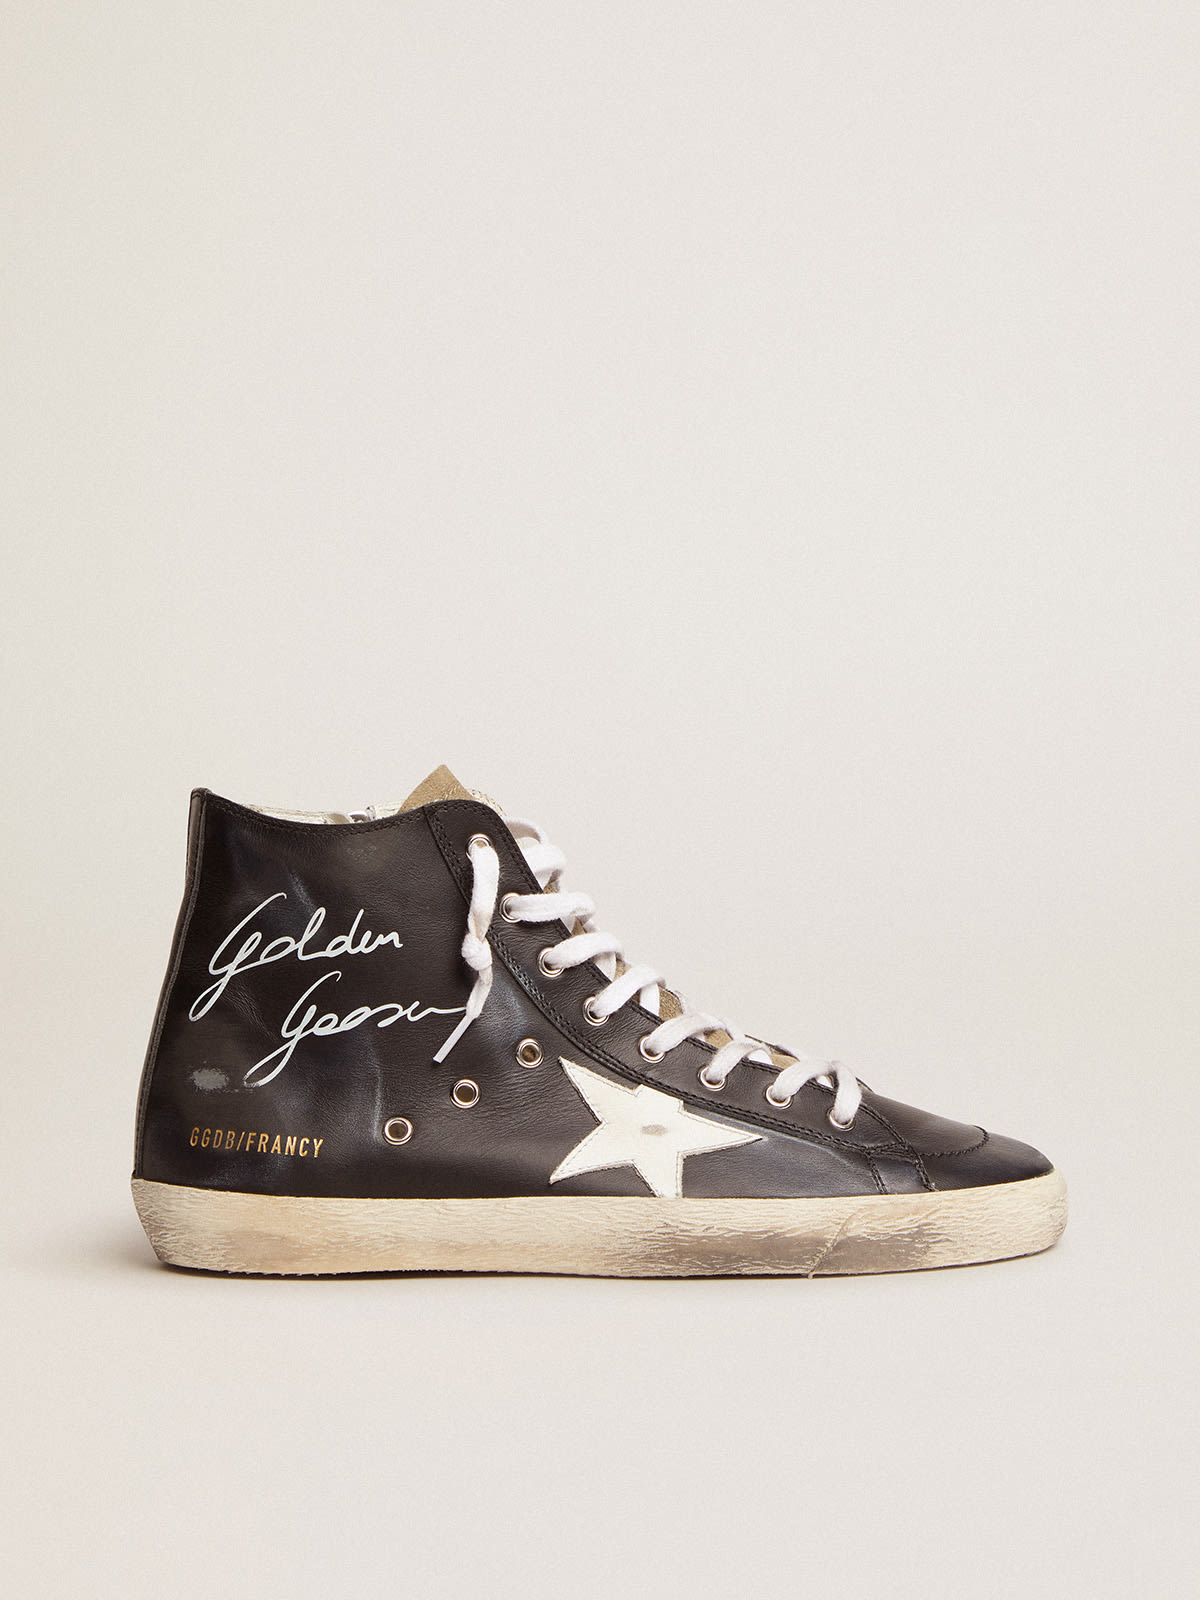 Golden Goose - Men's Francy with black leather upper and white leather star in 